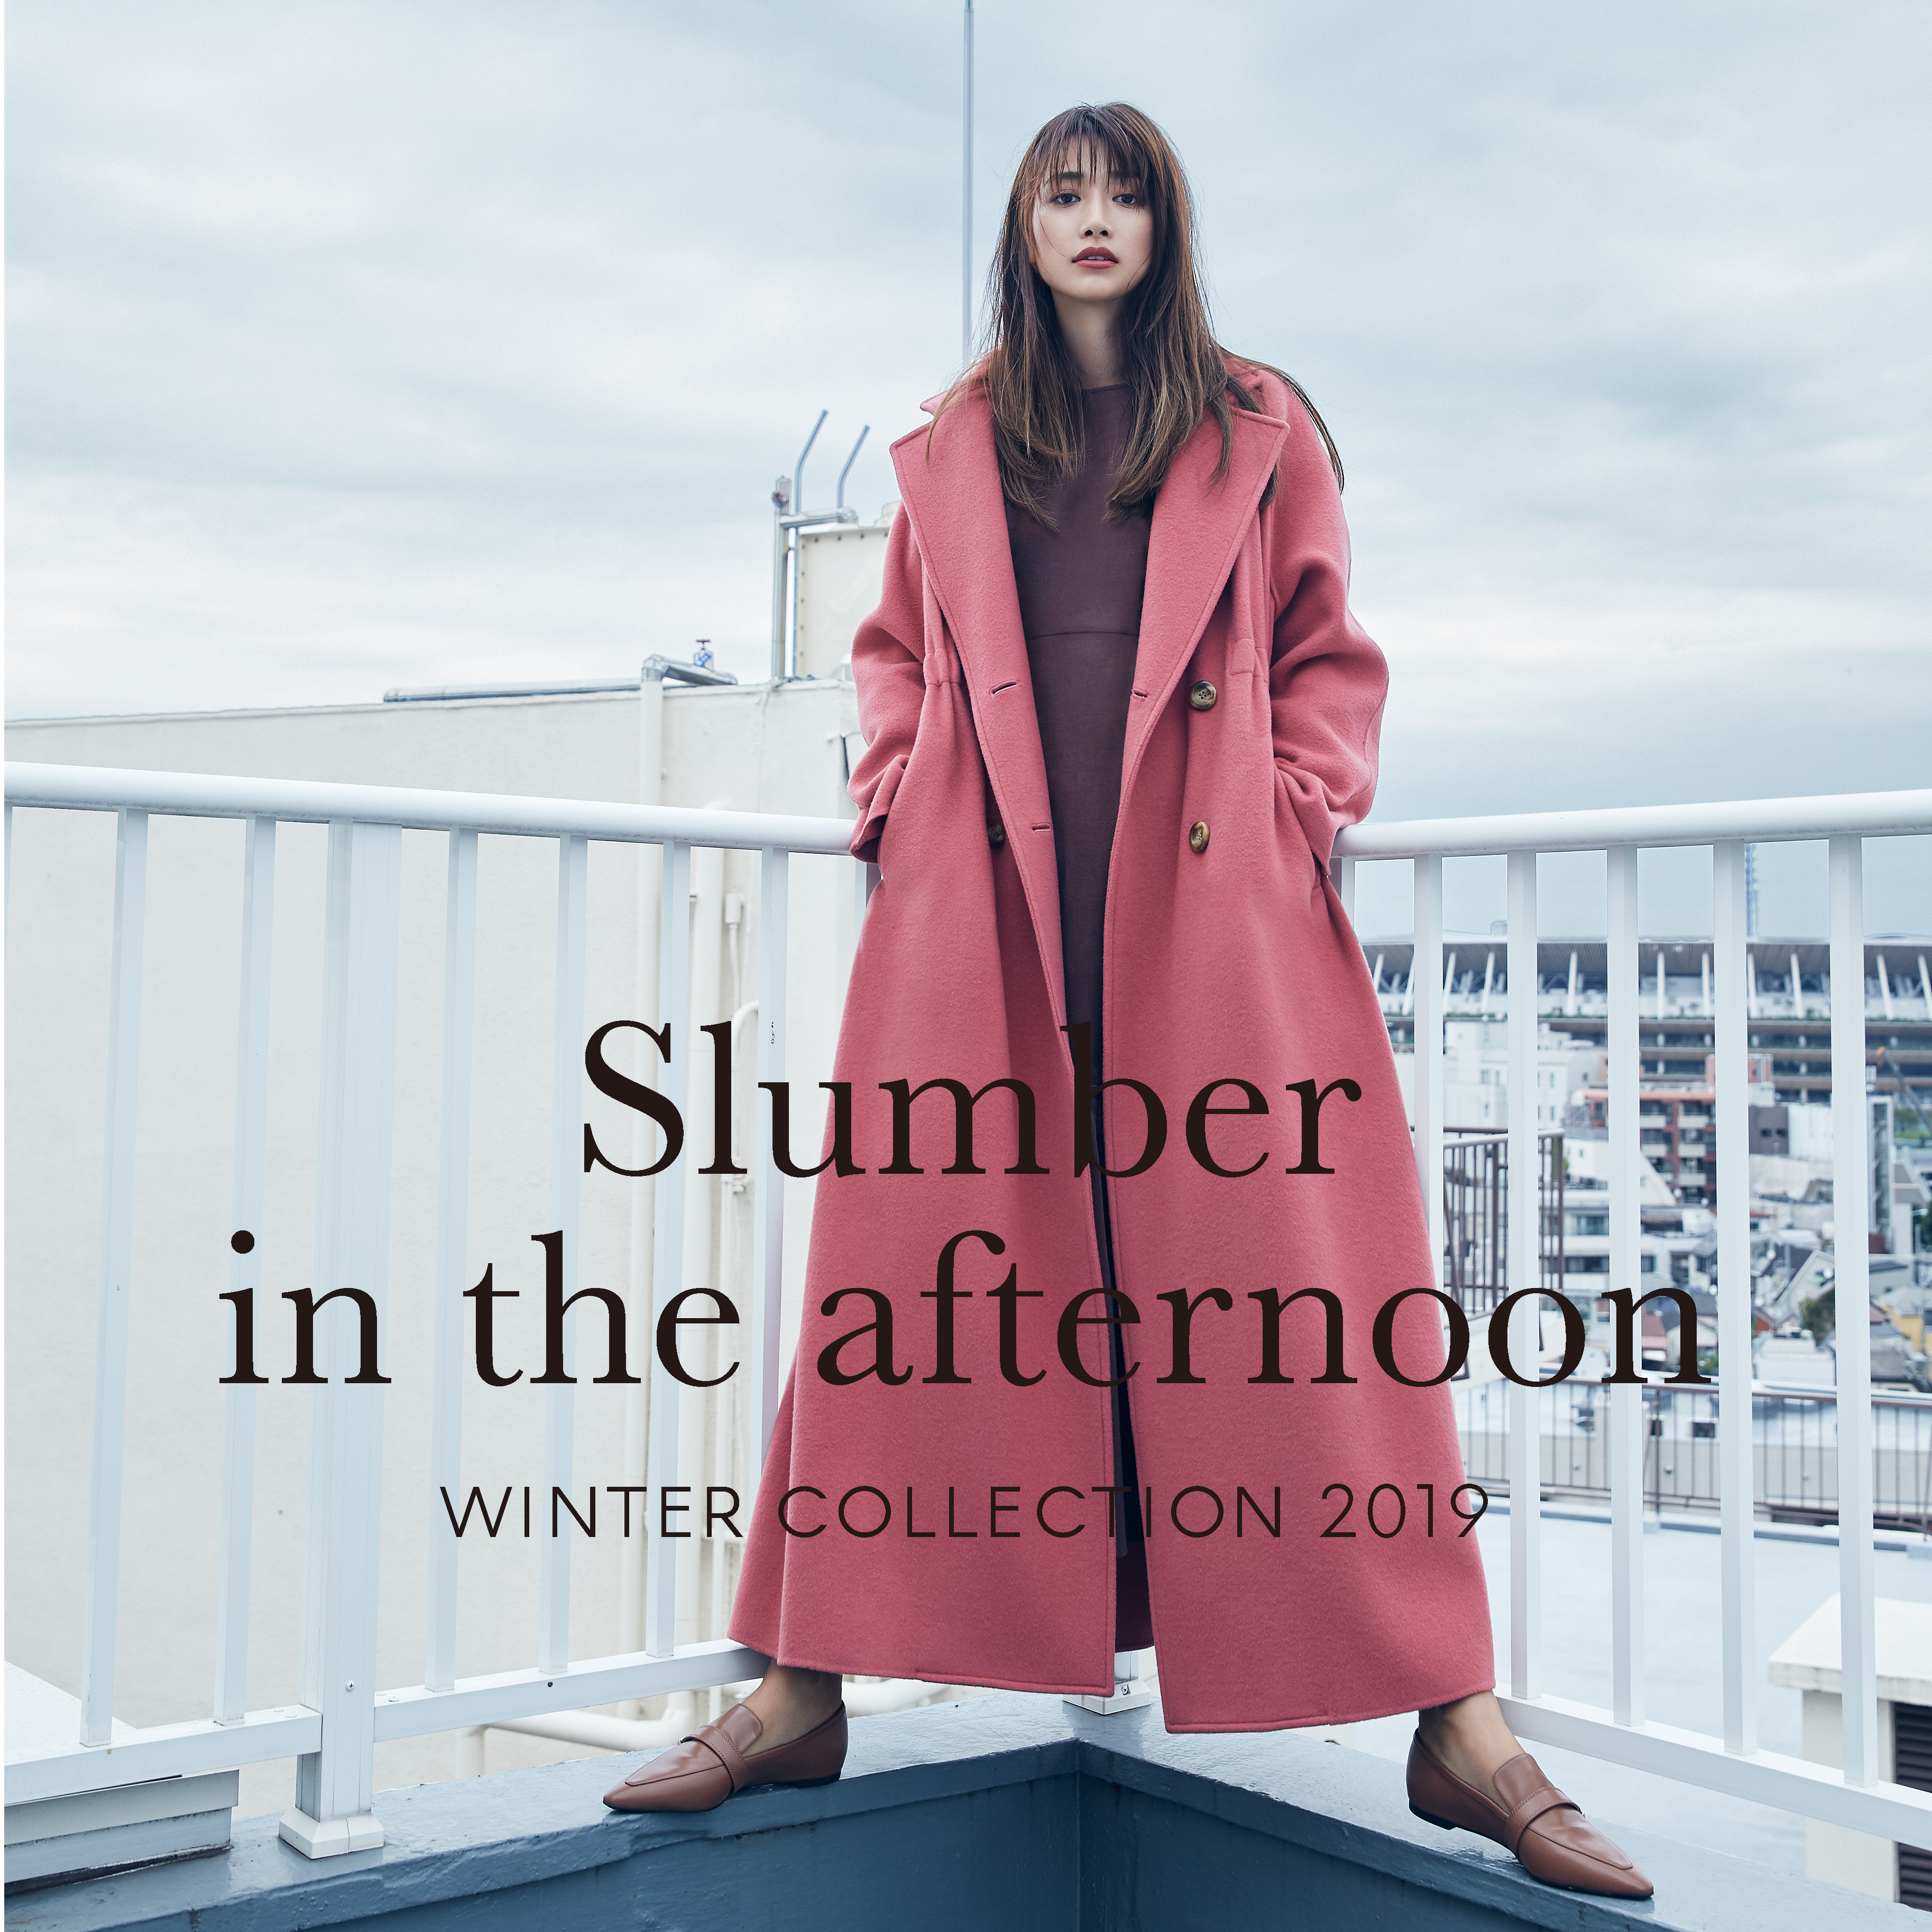 19 Winter Collection